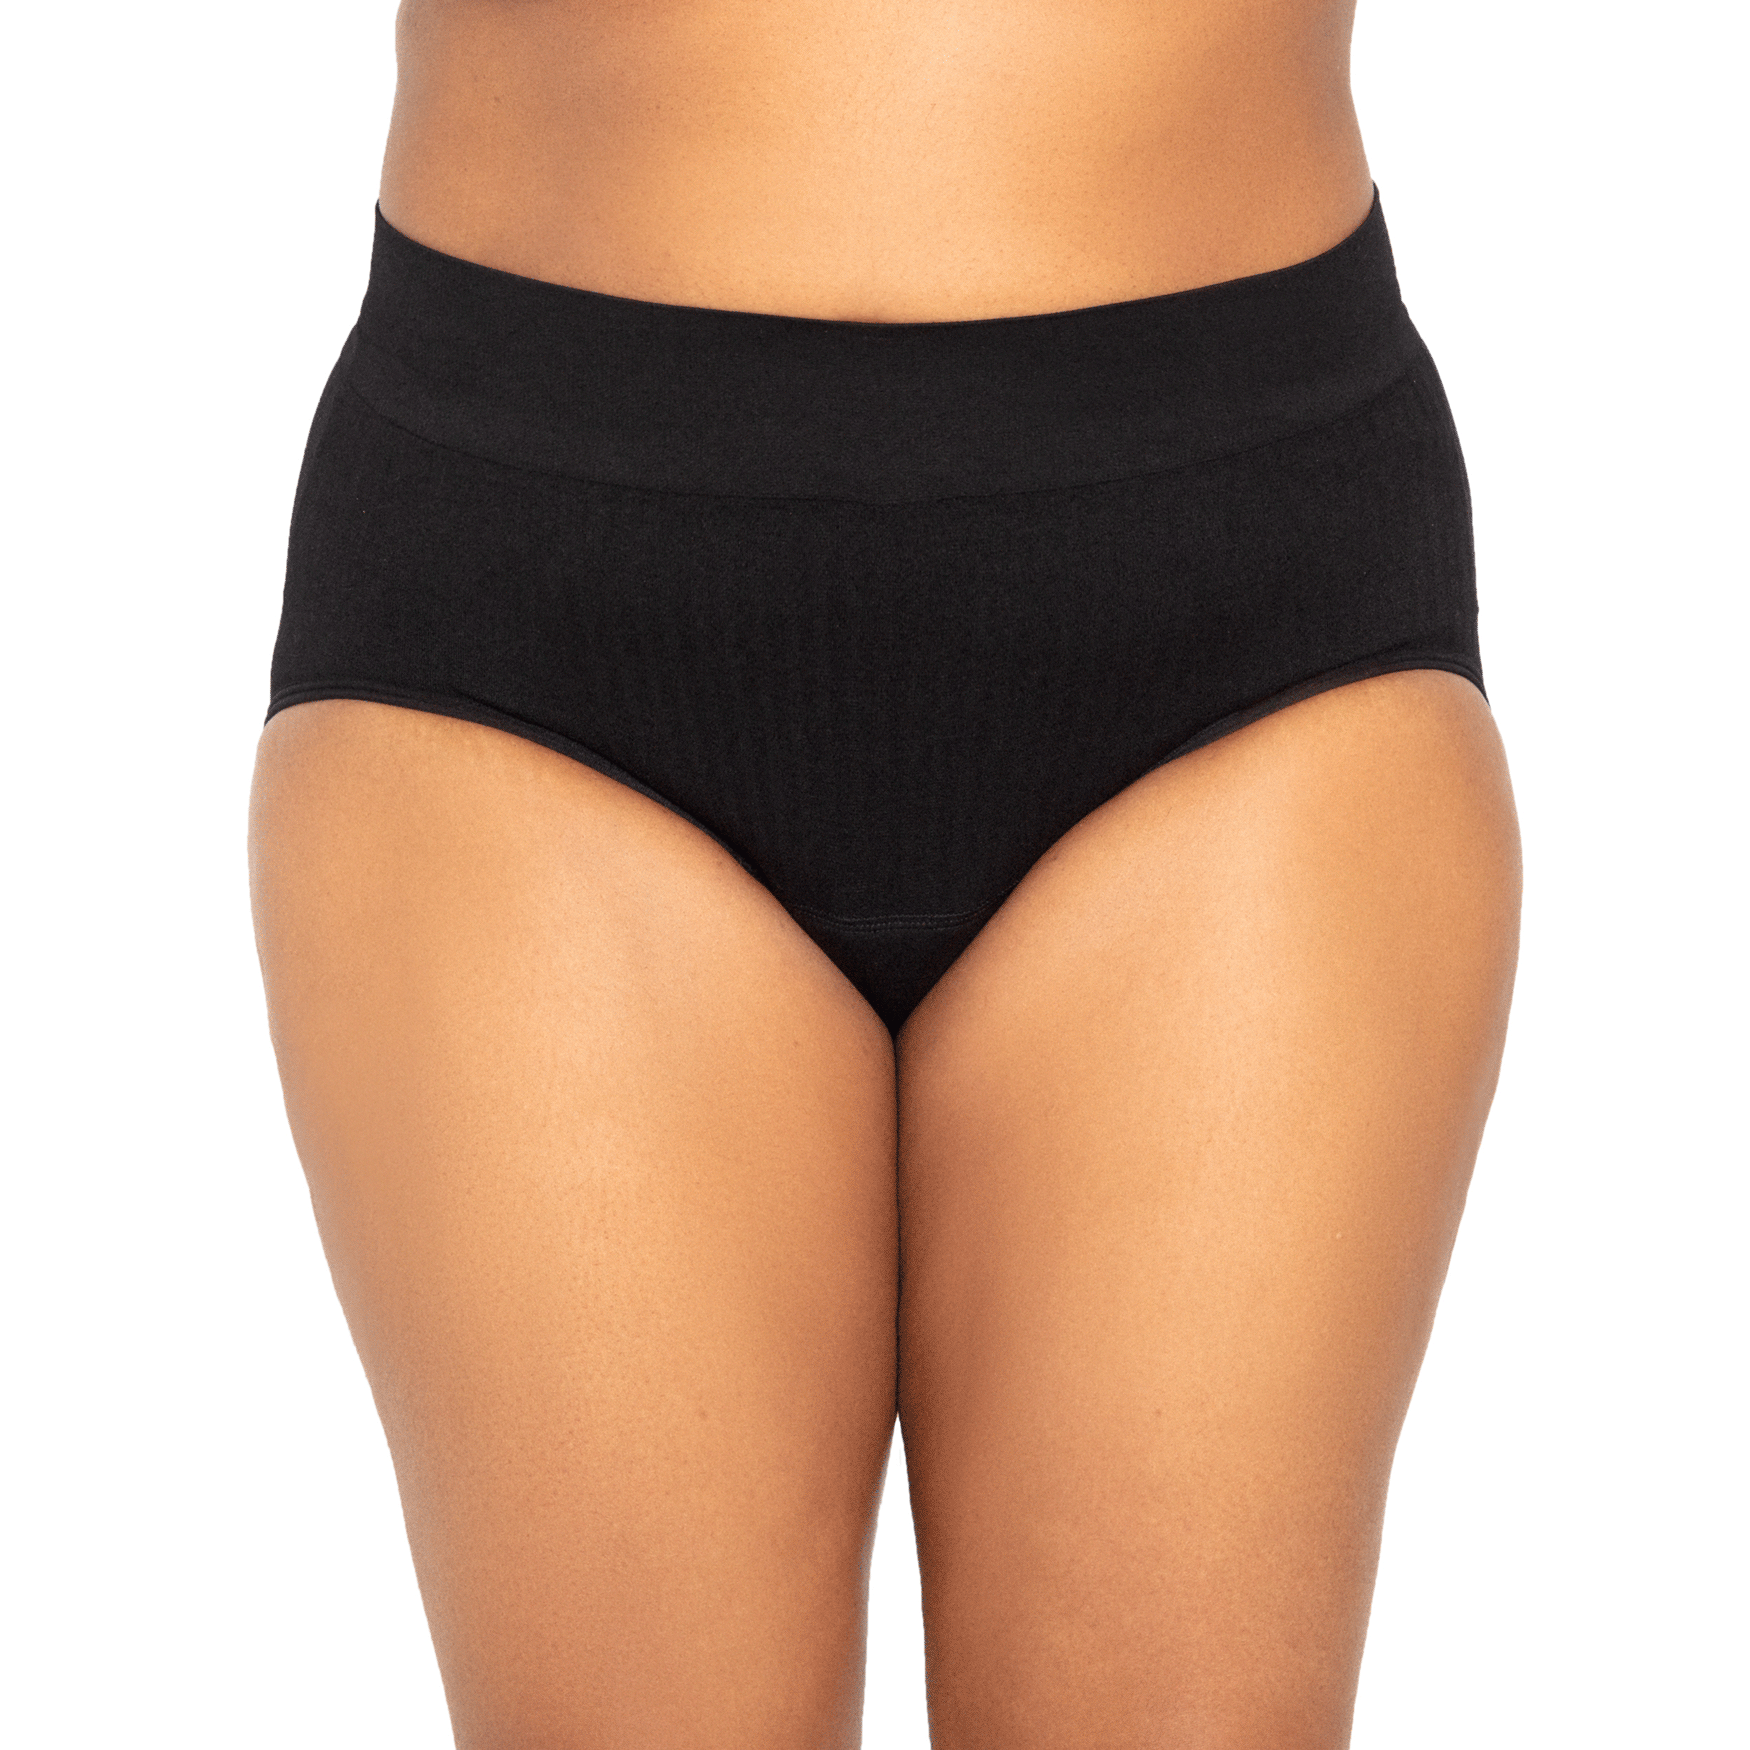  Bambody Leak Proof Hipster: Sporty Period Panties for Women and  Teens - 3 Pack: Black - Nude - Gray - Size 4 : Clothing, Shoes & Jewelry